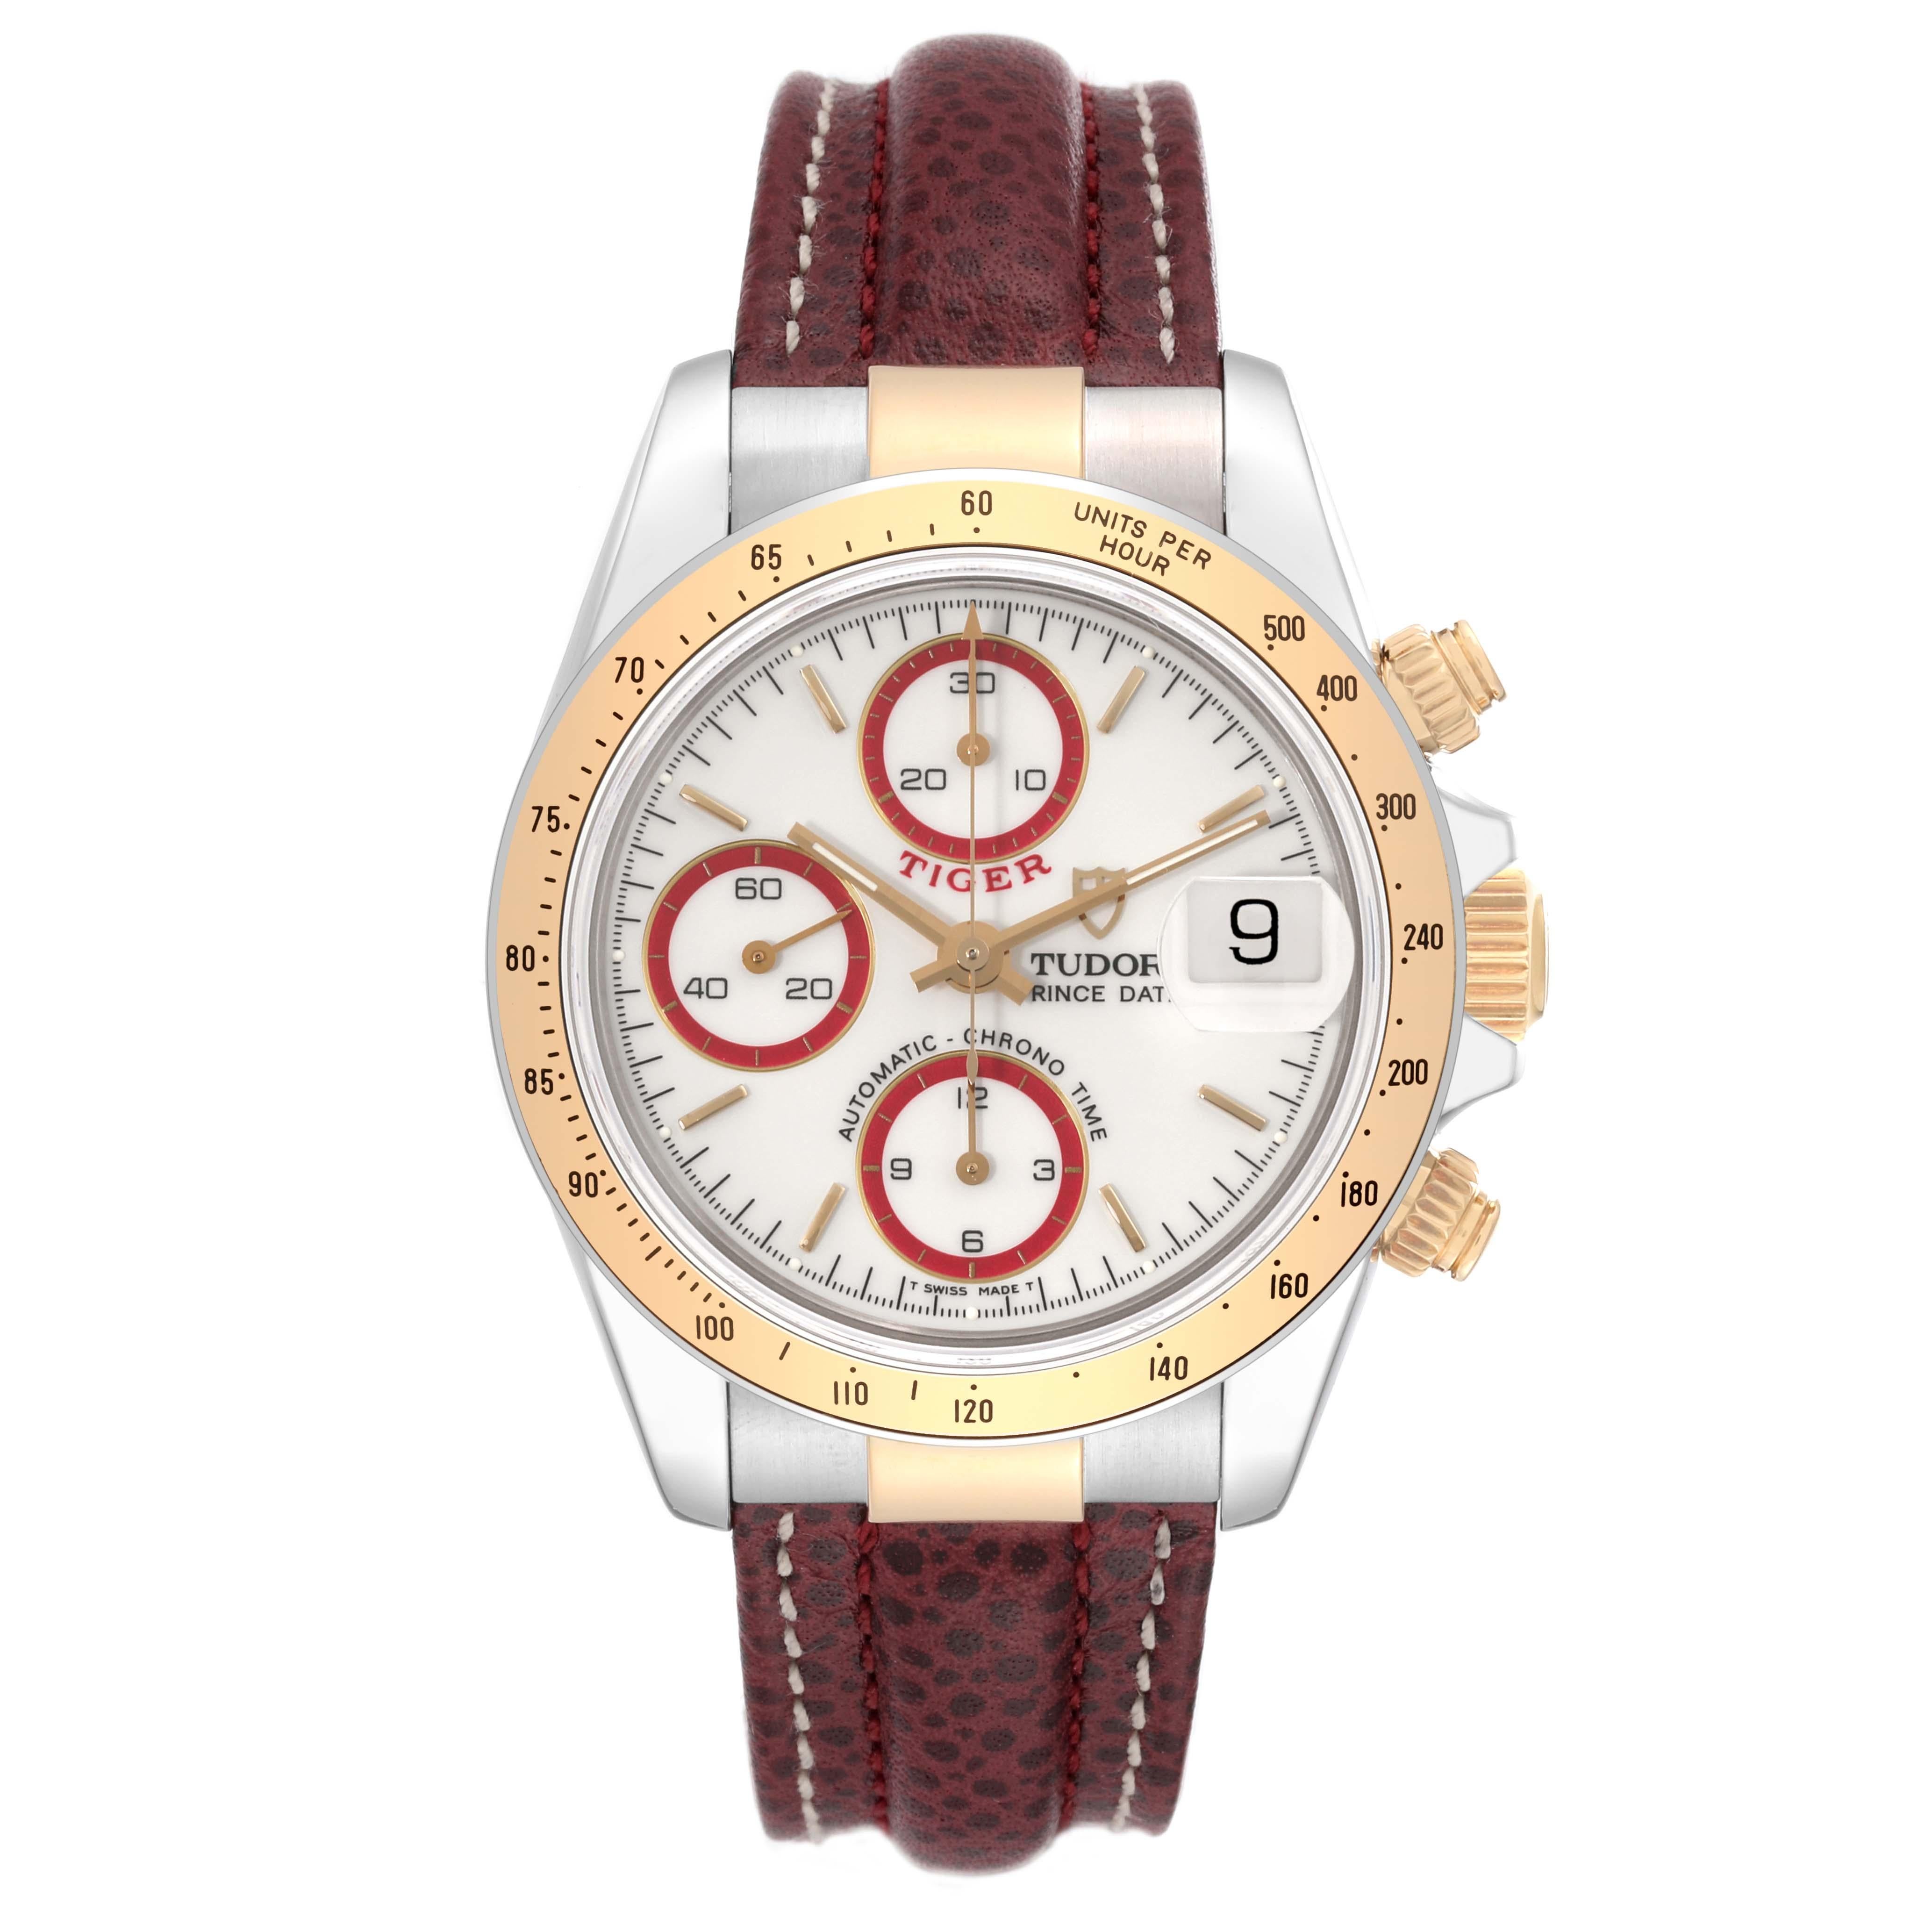 Tudor Tiger White Dial Steel Yellow Gold Mens Watch 79263 Box Papers. Automatic self-winding movement with chronograph function. Stainless steel and 18K yellow gold oyster case 40.0 mm in diameter. Tudor logo on a crown. 18K yellow gold tachometer